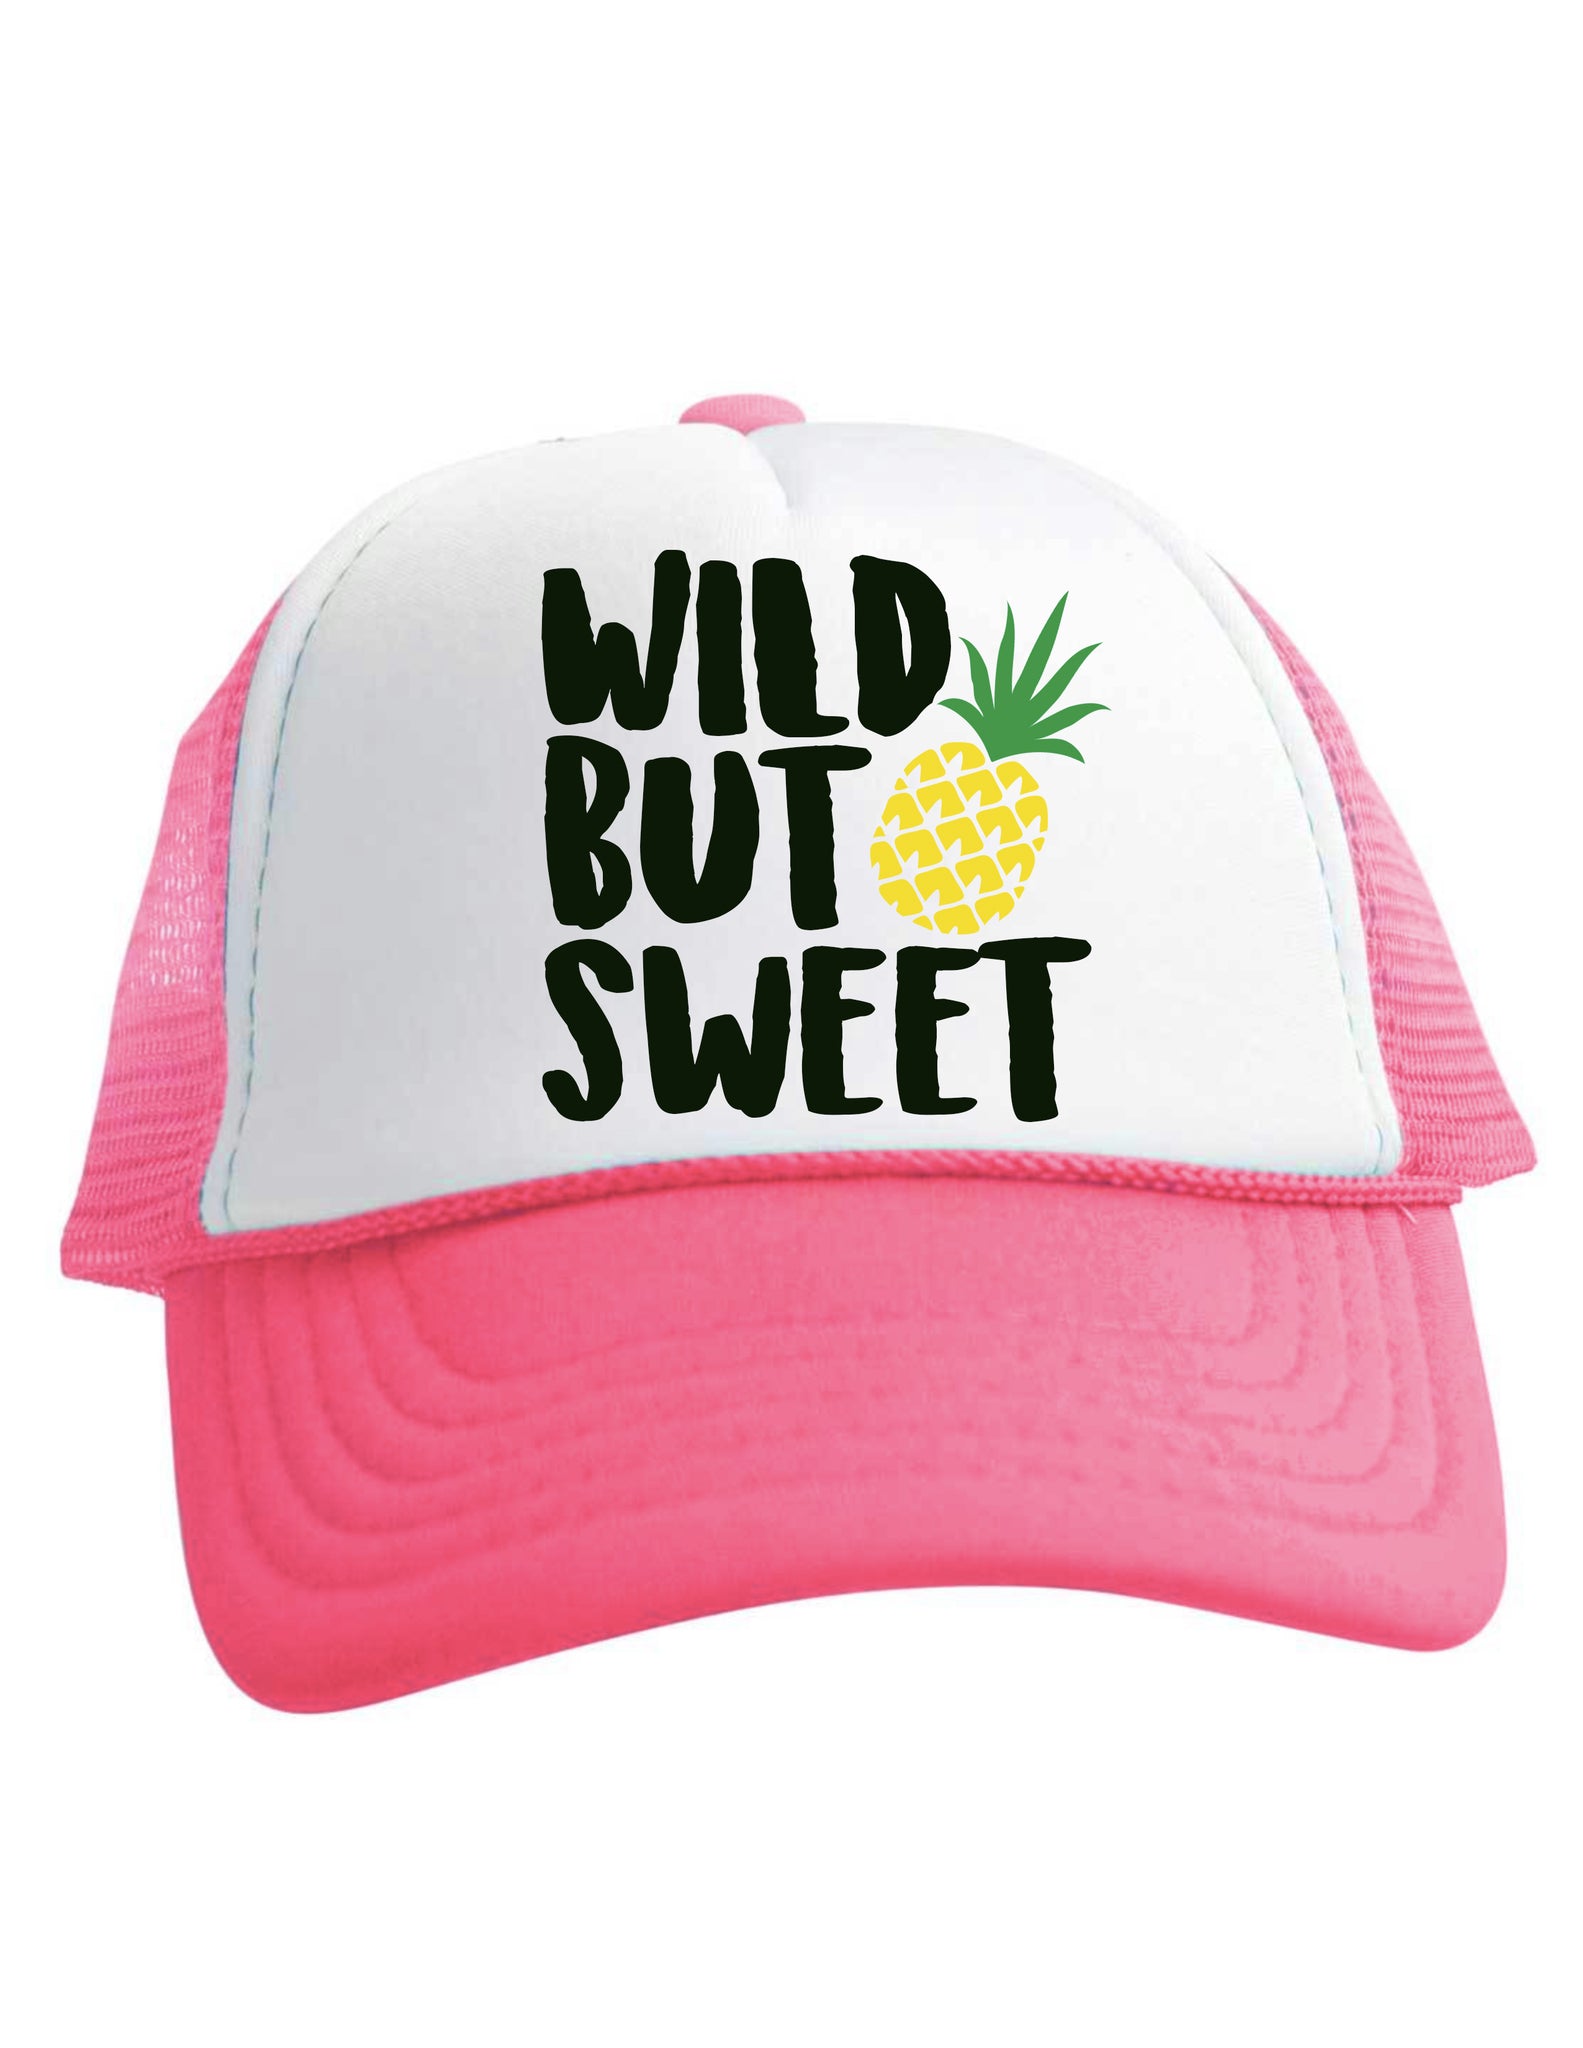 Wild But Sweet Trucker Hat Pineapple Baby Toddler Youth Adult Size Beau and Belle Littles